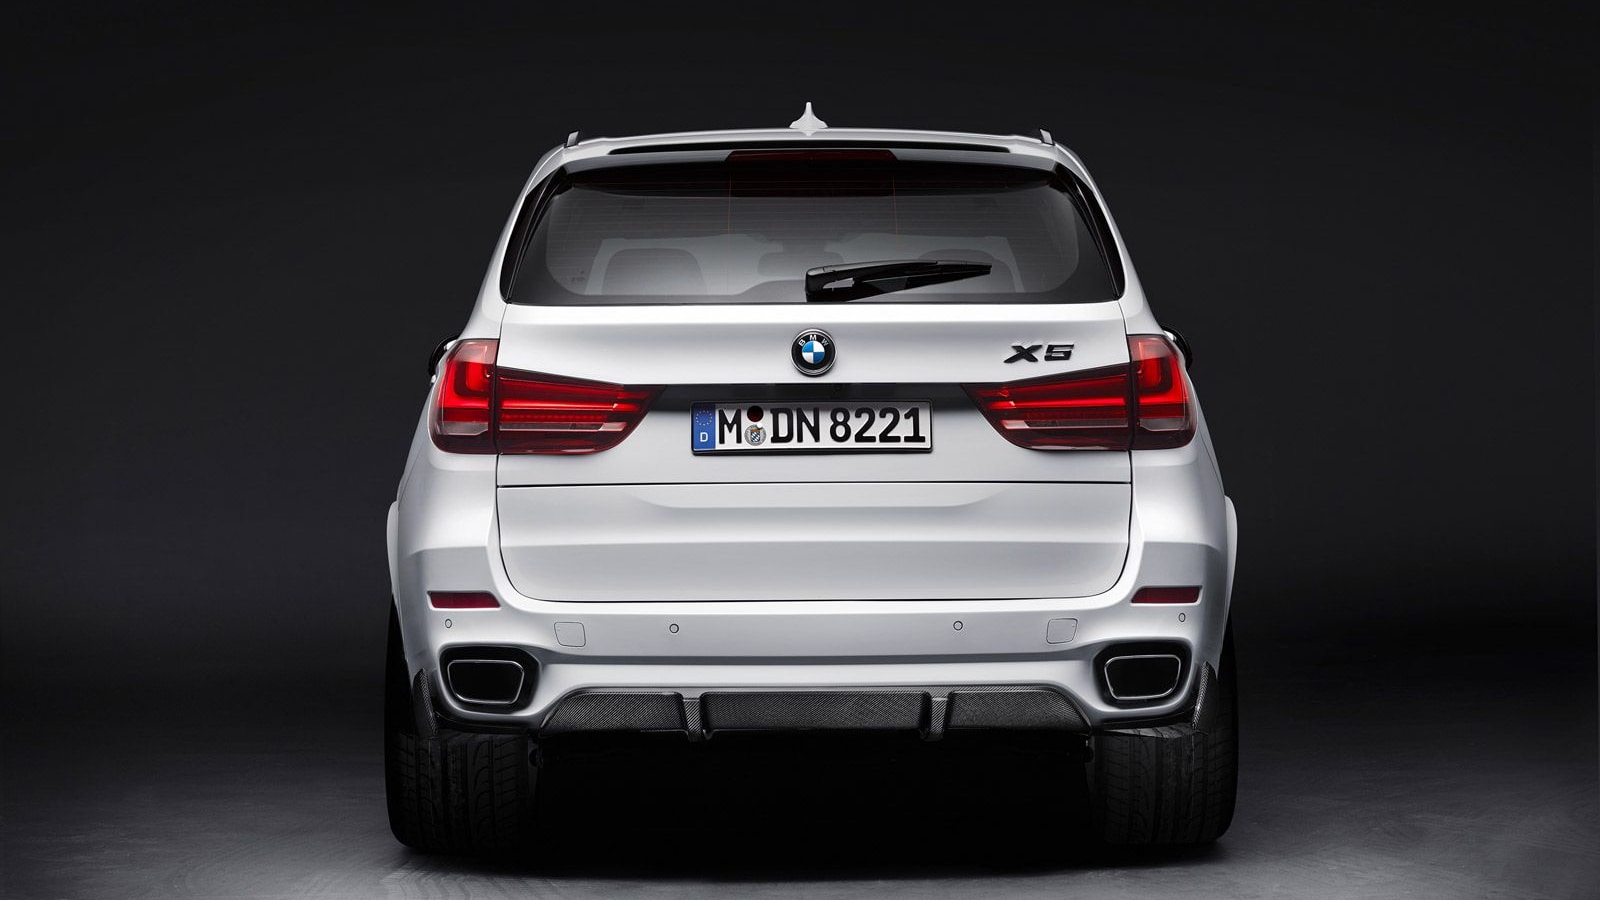 2014 BMW X5 equipped with M Performance parts